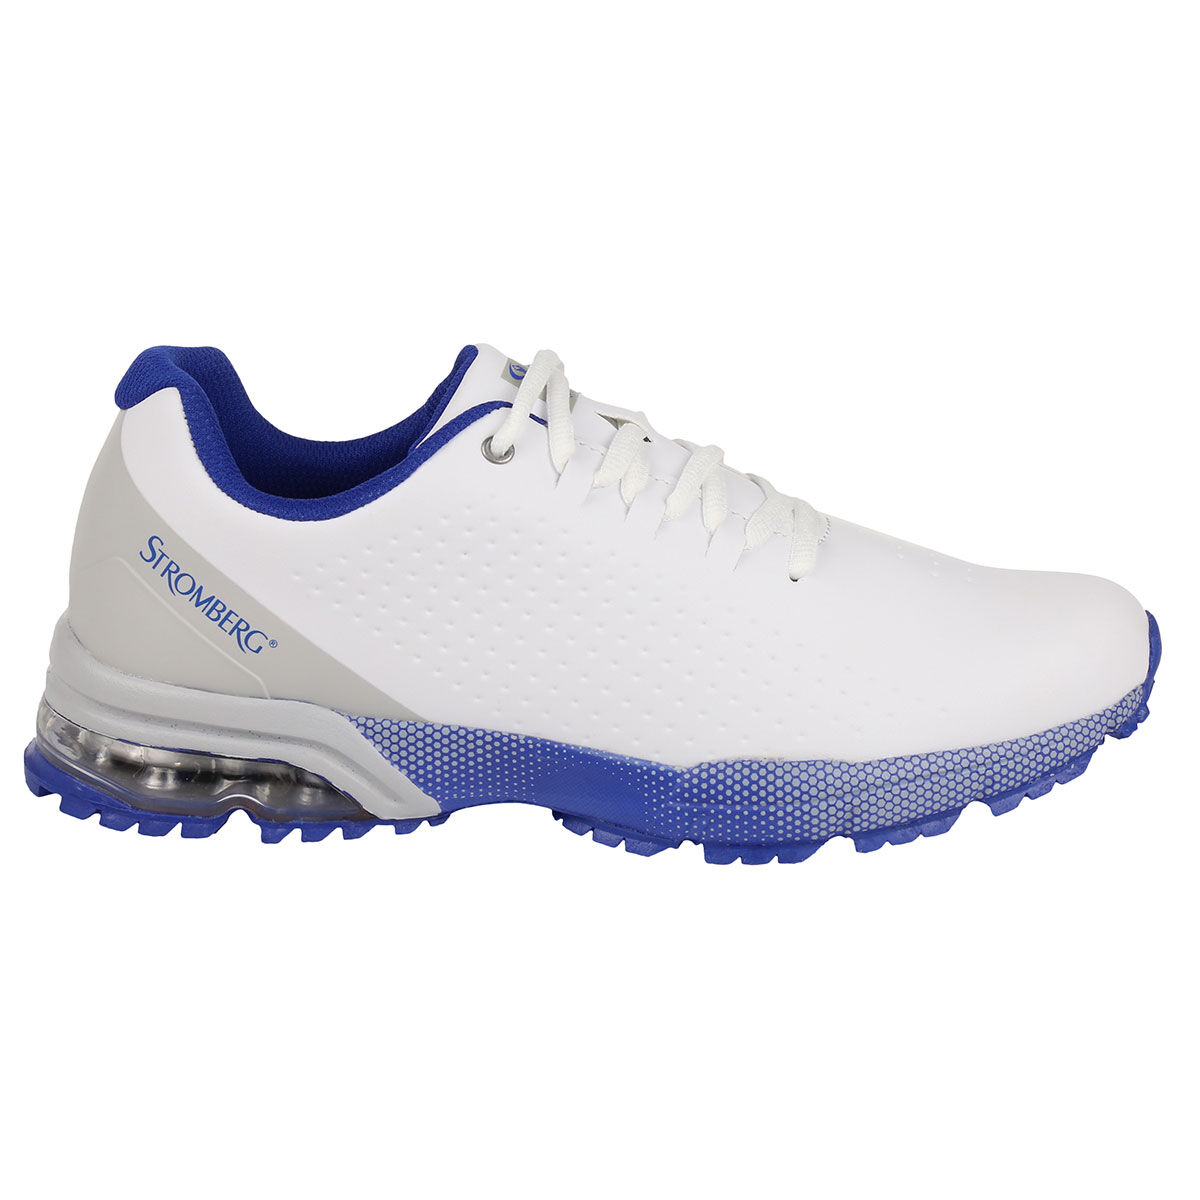 Stromberg White and Blue Waterproof Ailsa Spikeless Golf Shoes, Size: 11 | American Golf - Father's Day Gift von Stromberg